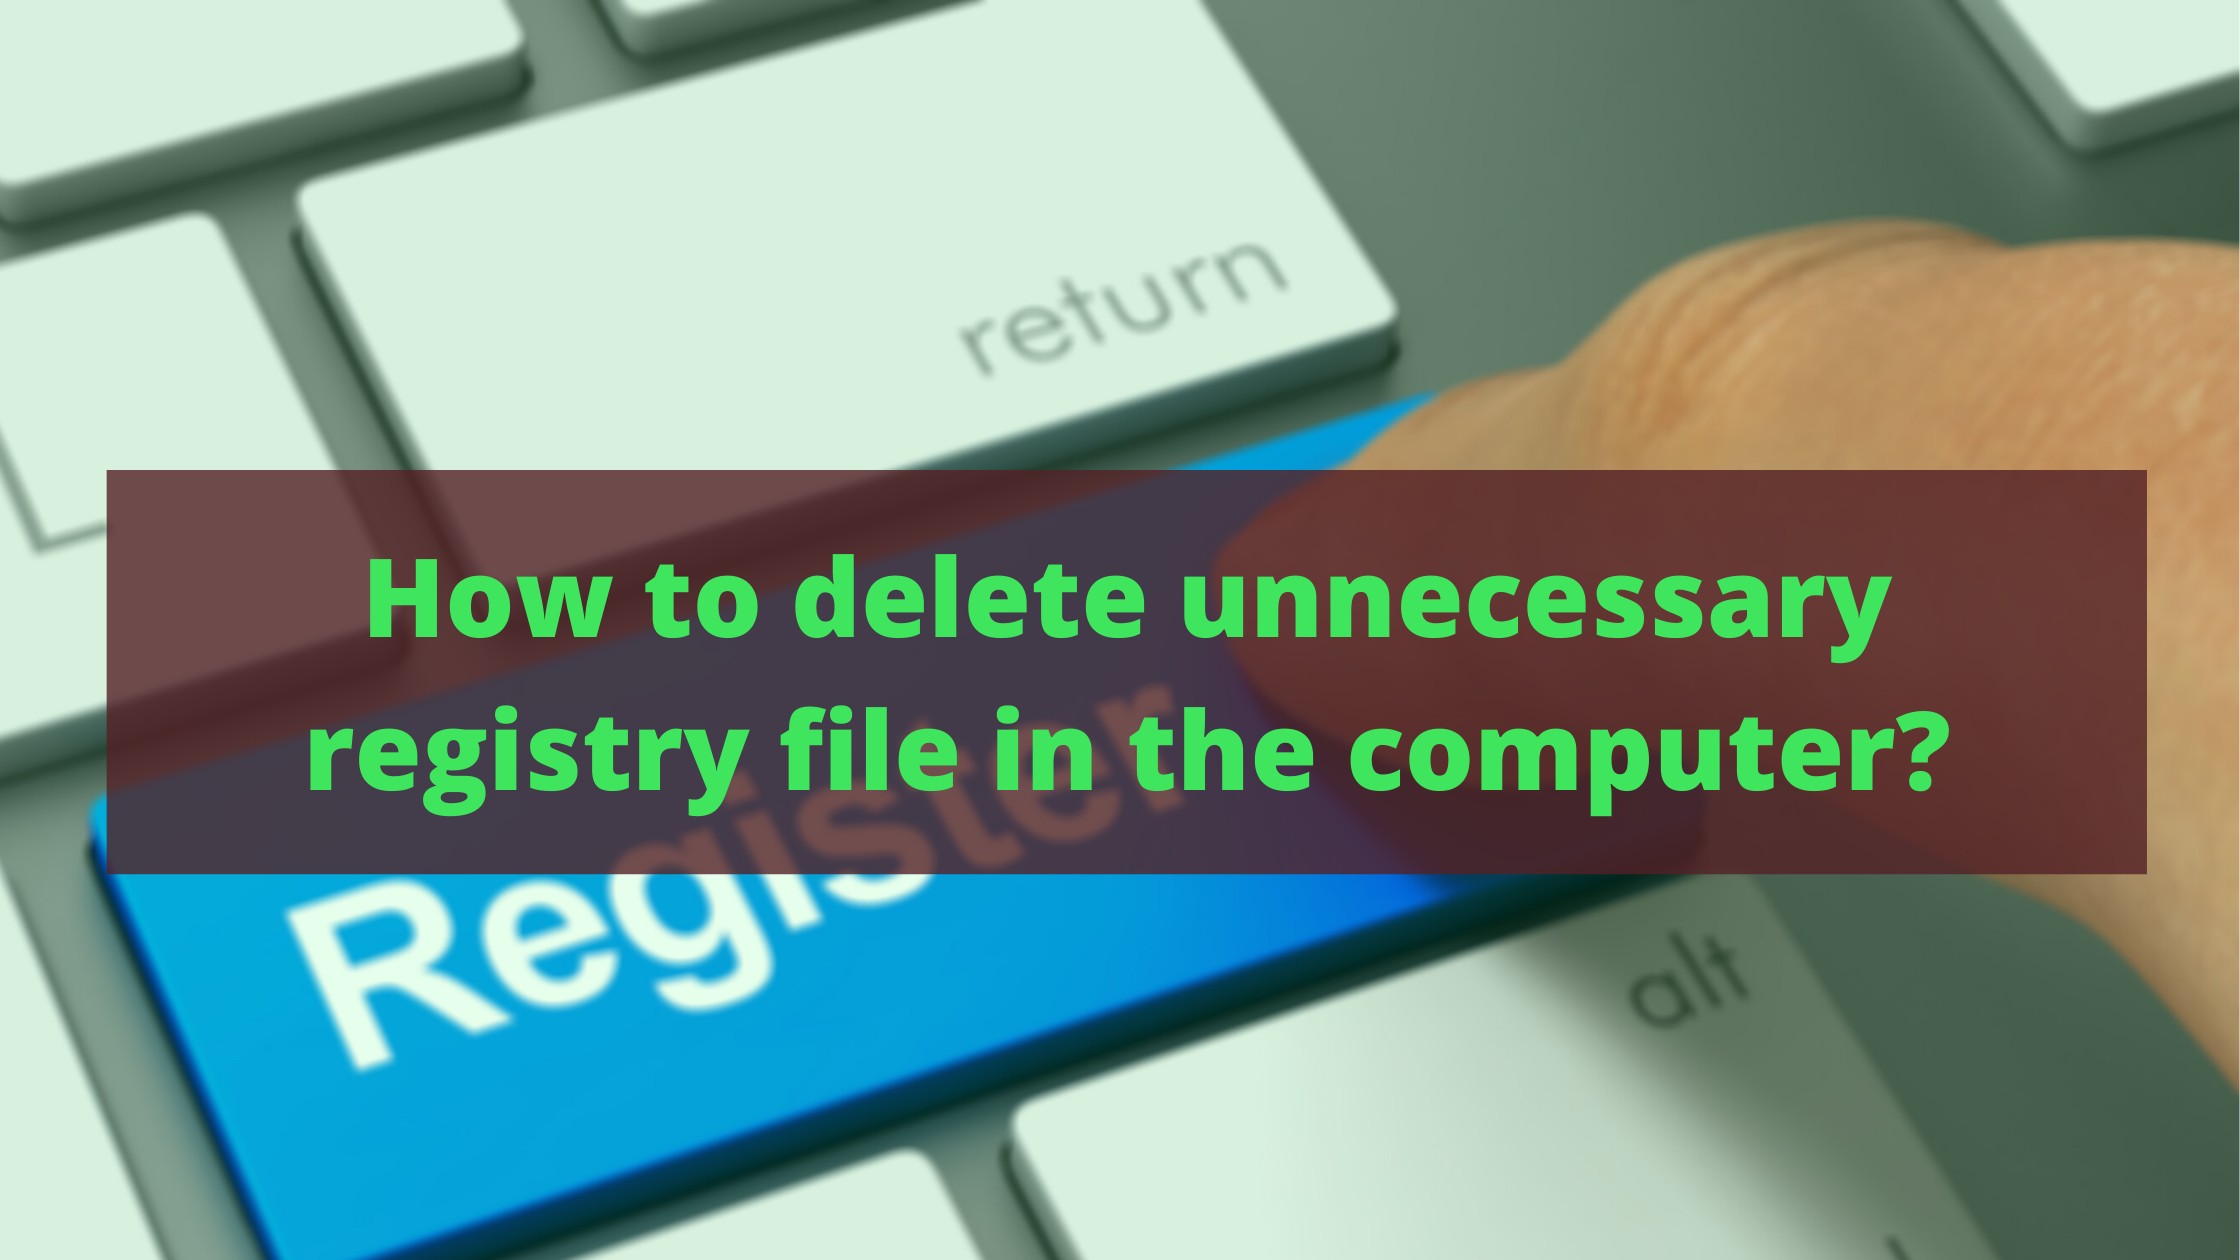 How to delete unnecessary registry file in the computer